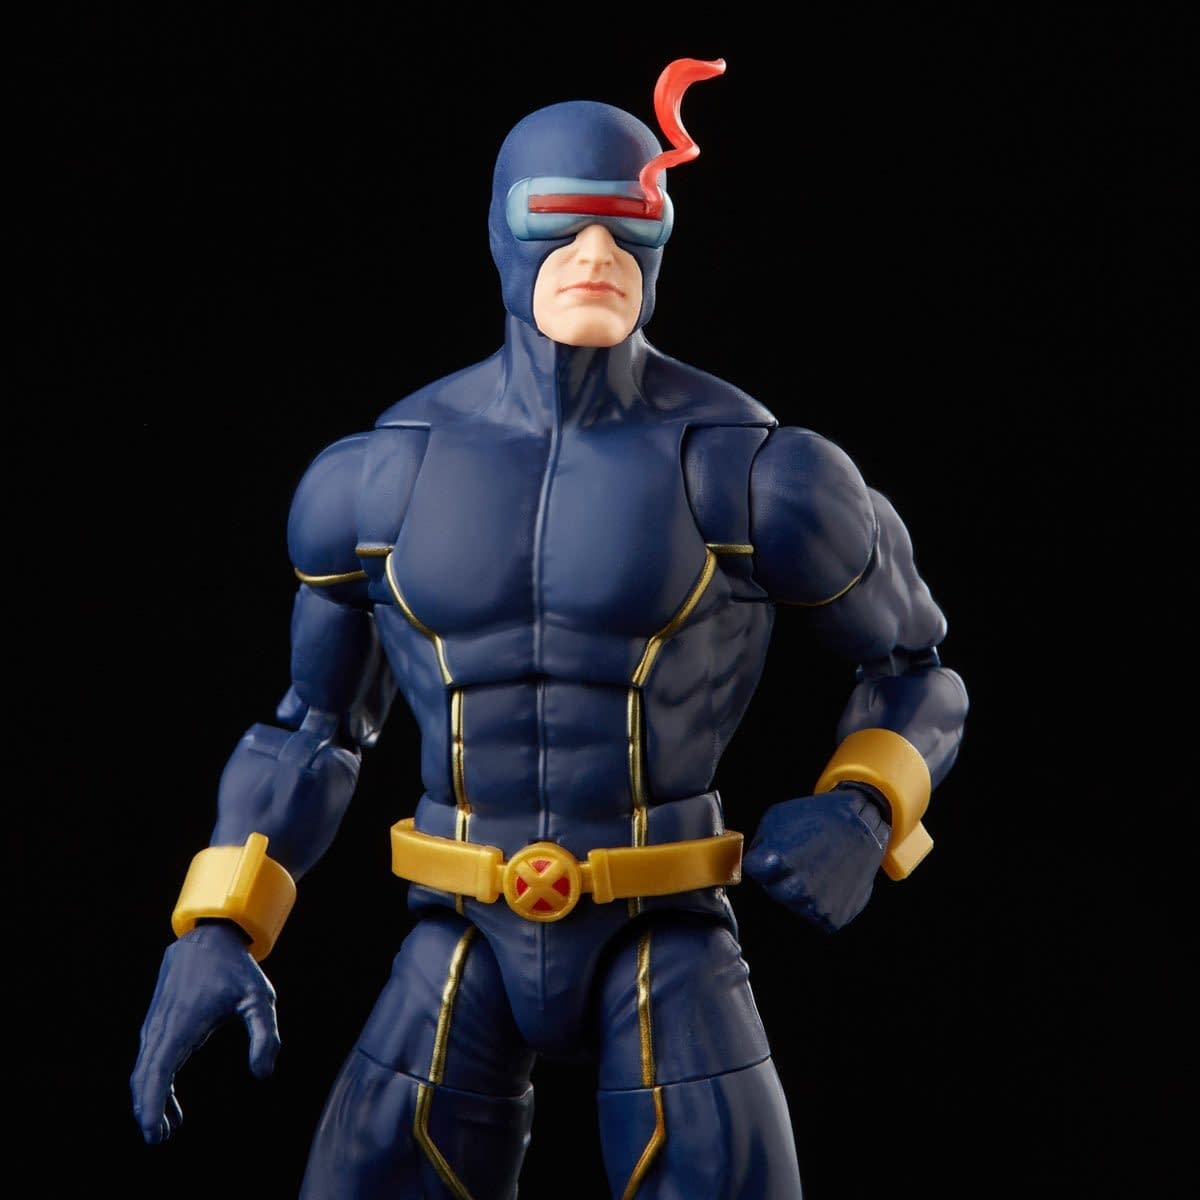 Astonishing X-Men's Cyclops Saves the Day with Marvel Legends 